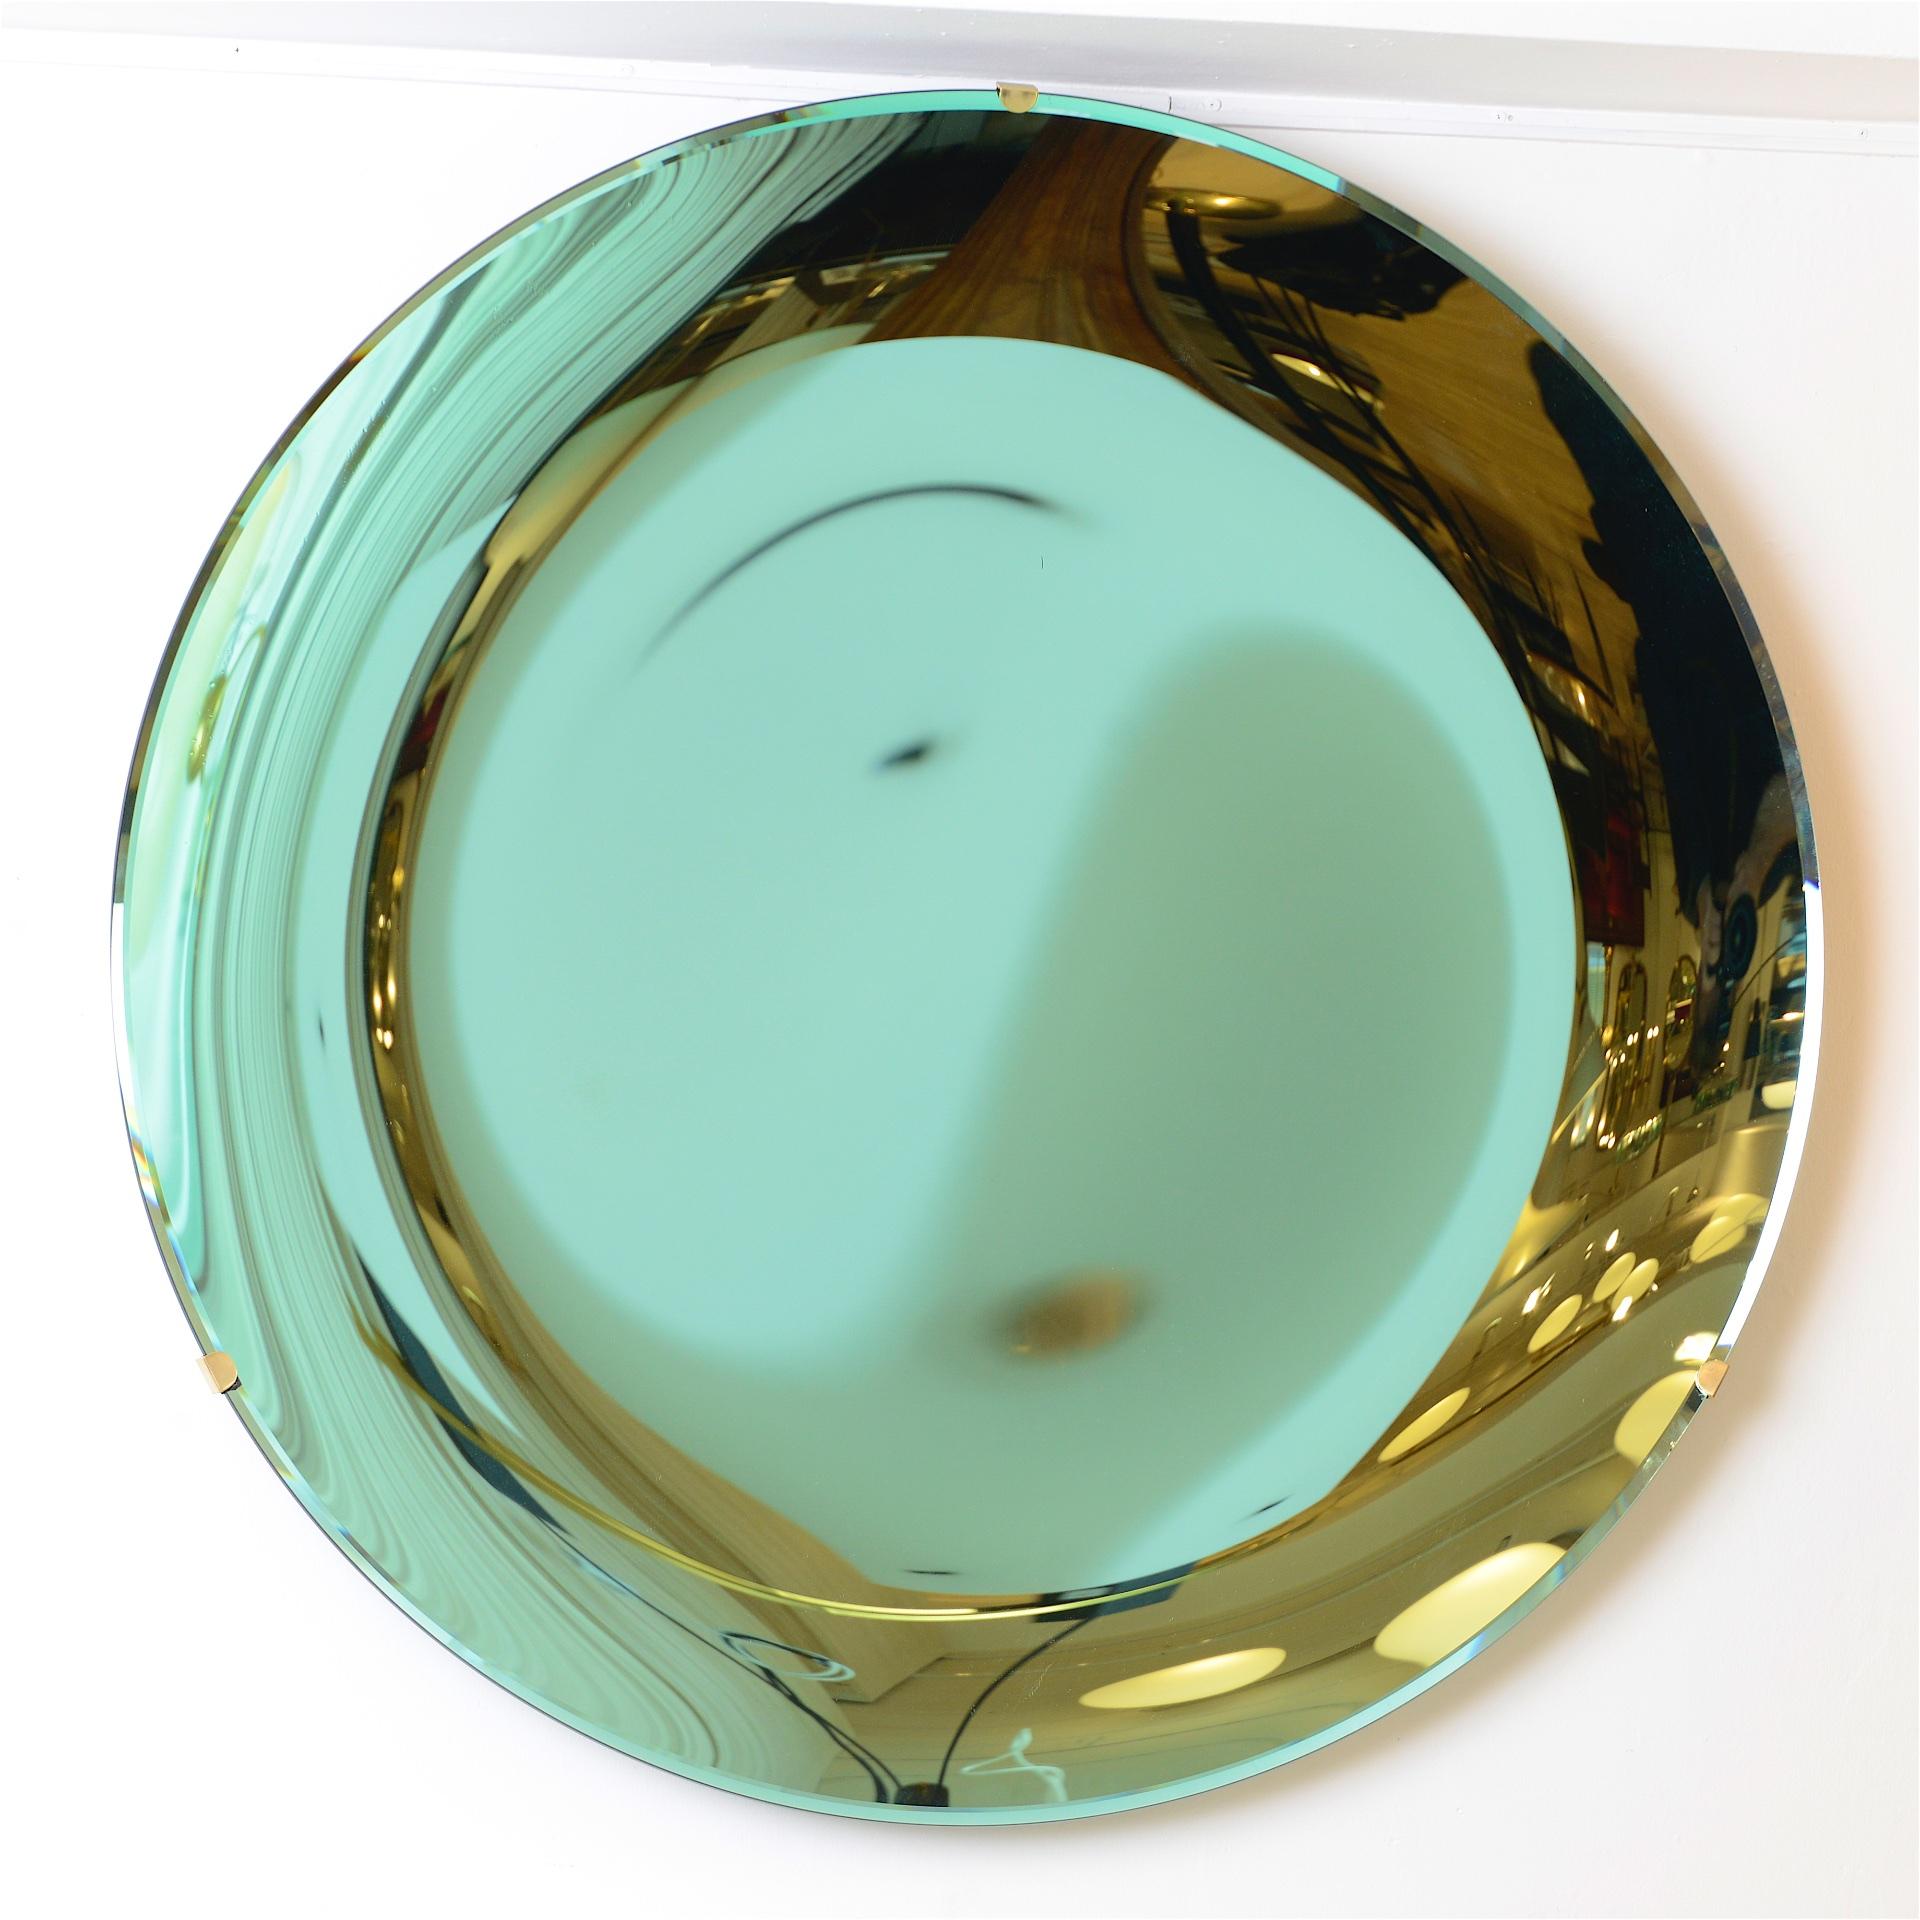 Anish Kapoor style concave mirror. 

Sculptural green glass mirror, with brass wall fixing.

Excellent quality mirror with amazing reflections. 

Available in pink gold, copper and blue. Also in antique glass.

Please ask re alternative colours.